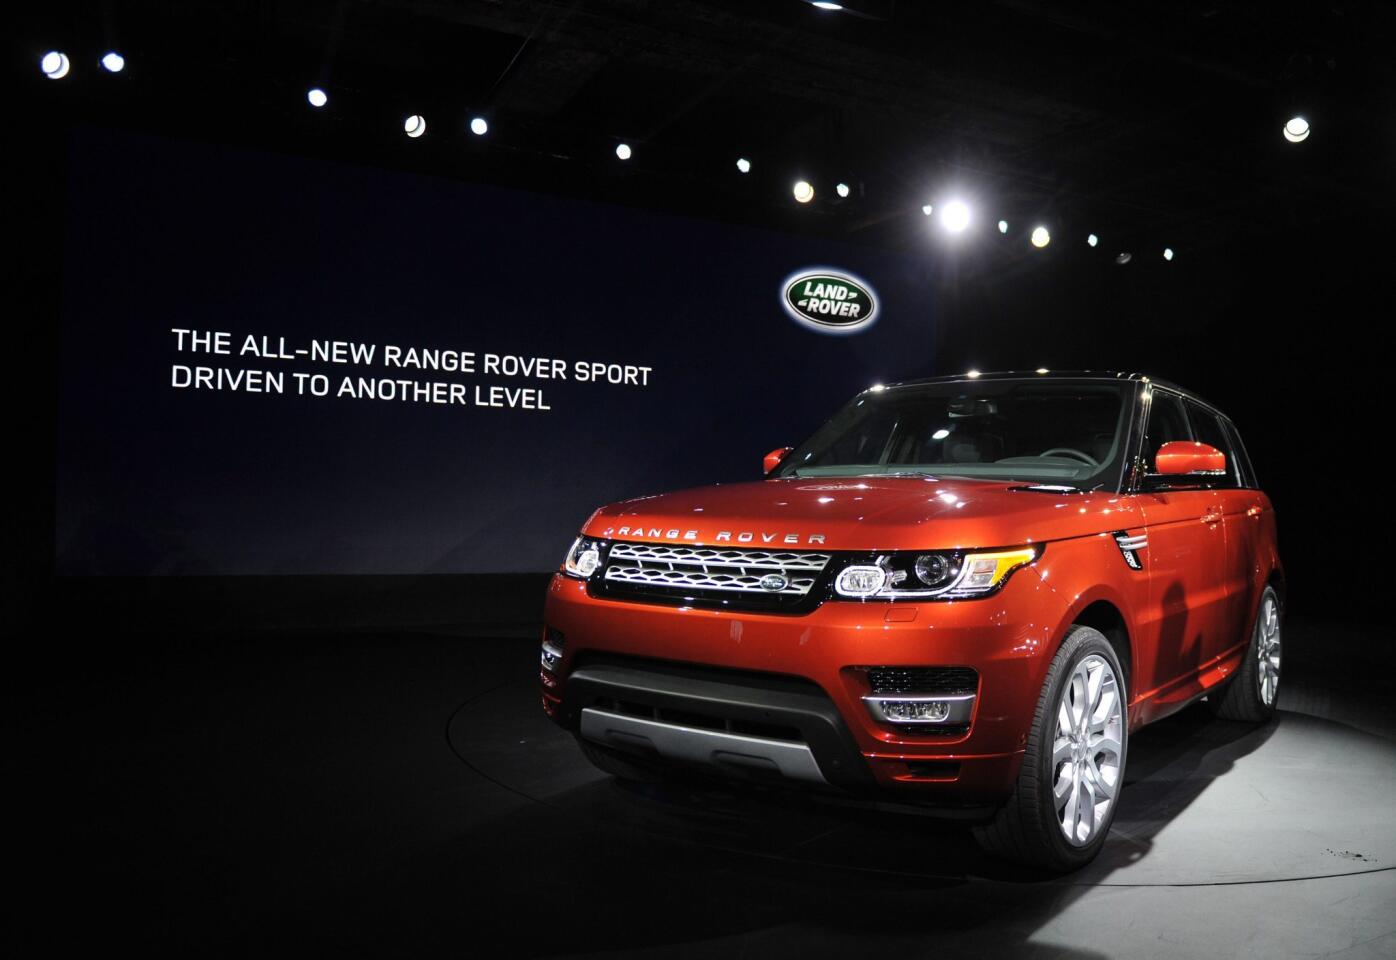 The all-new 2014 Range Rover Sport, seen here at its debut in New York, sheds about 800 pounds versus the previous model, thanks to the liberal use of aluminum. It will be available with either a supercharged V-6 or a supercharged V-8.